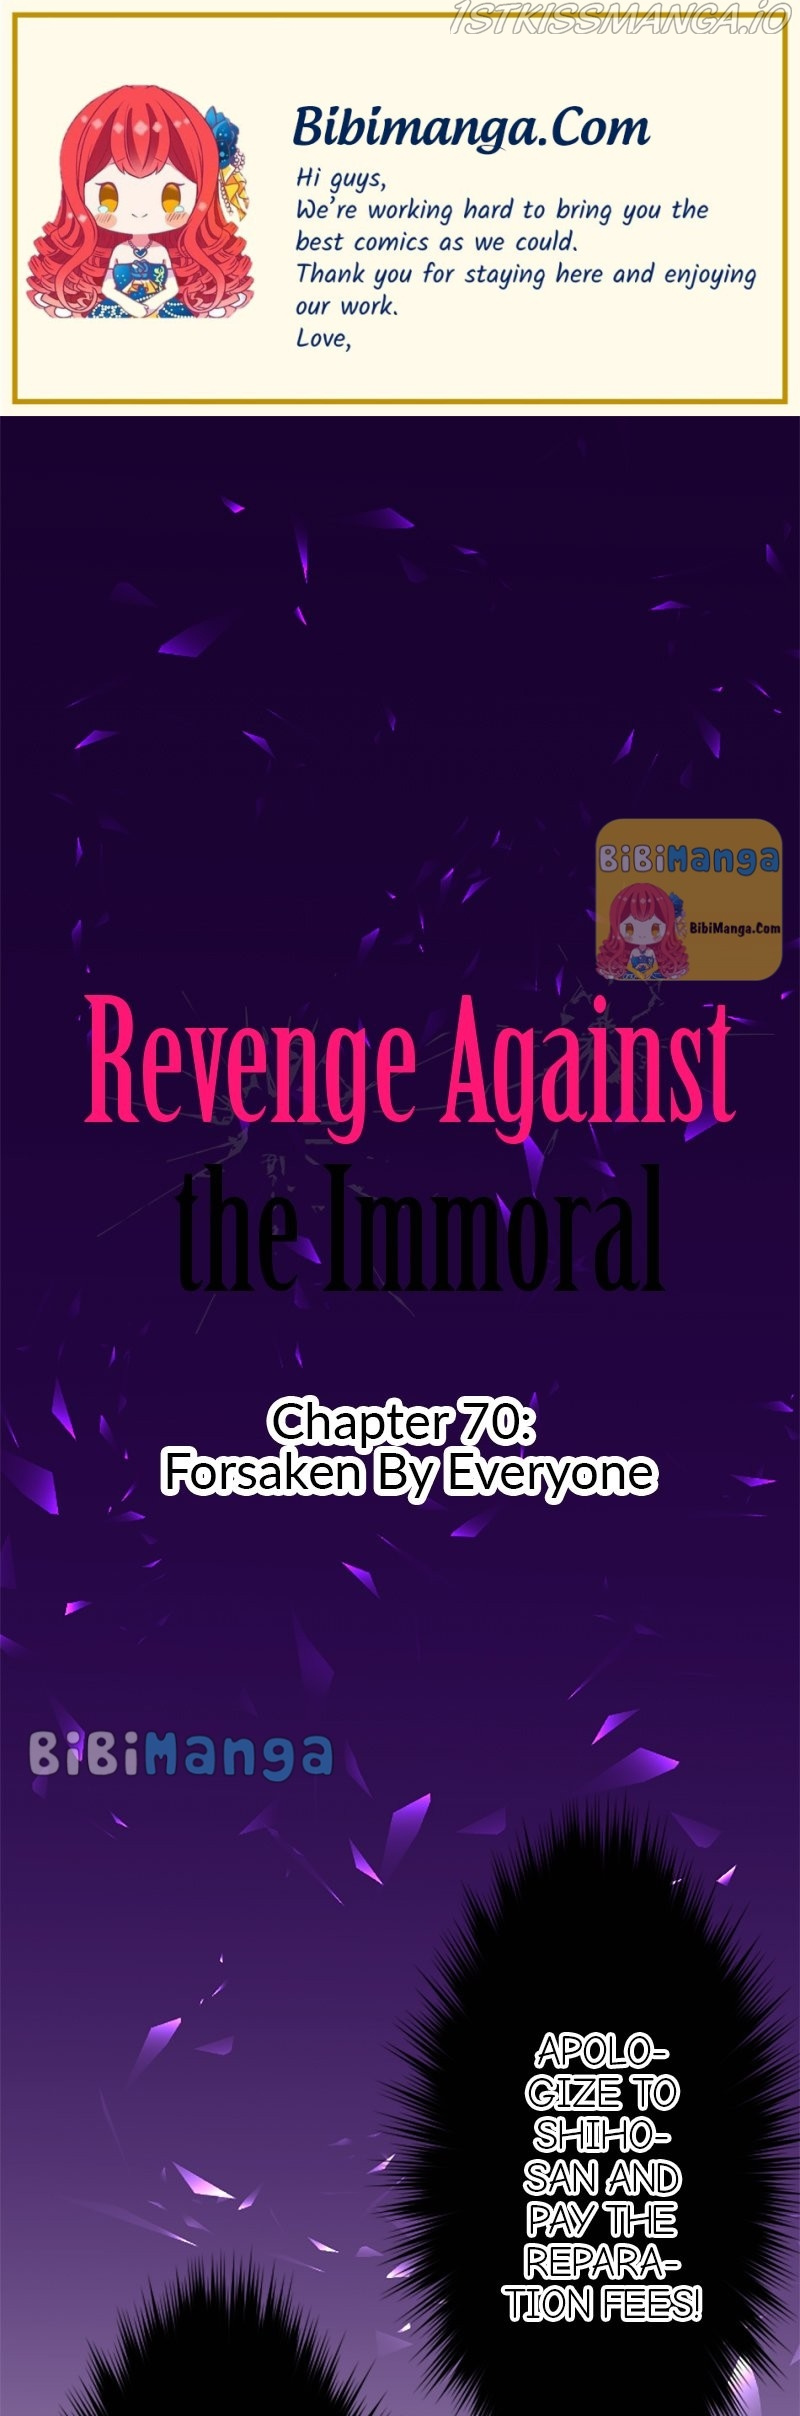 Revenge Against The Immoral - Page 1